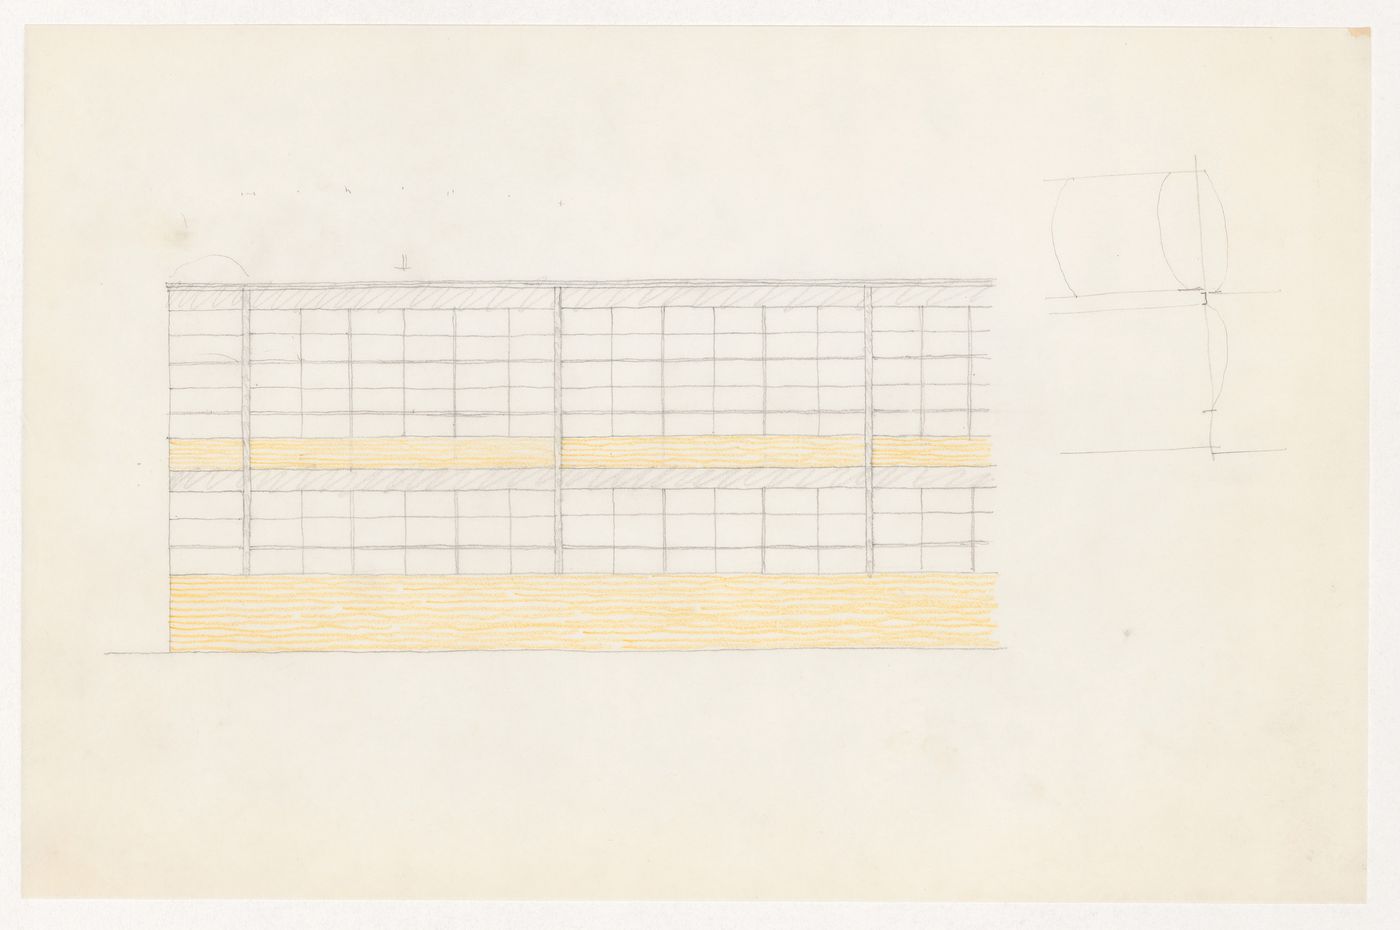 Partial sketch elevation for the Metallurgy Building, Illinois Institute of Technology, Chicago, with an unidentified sketch